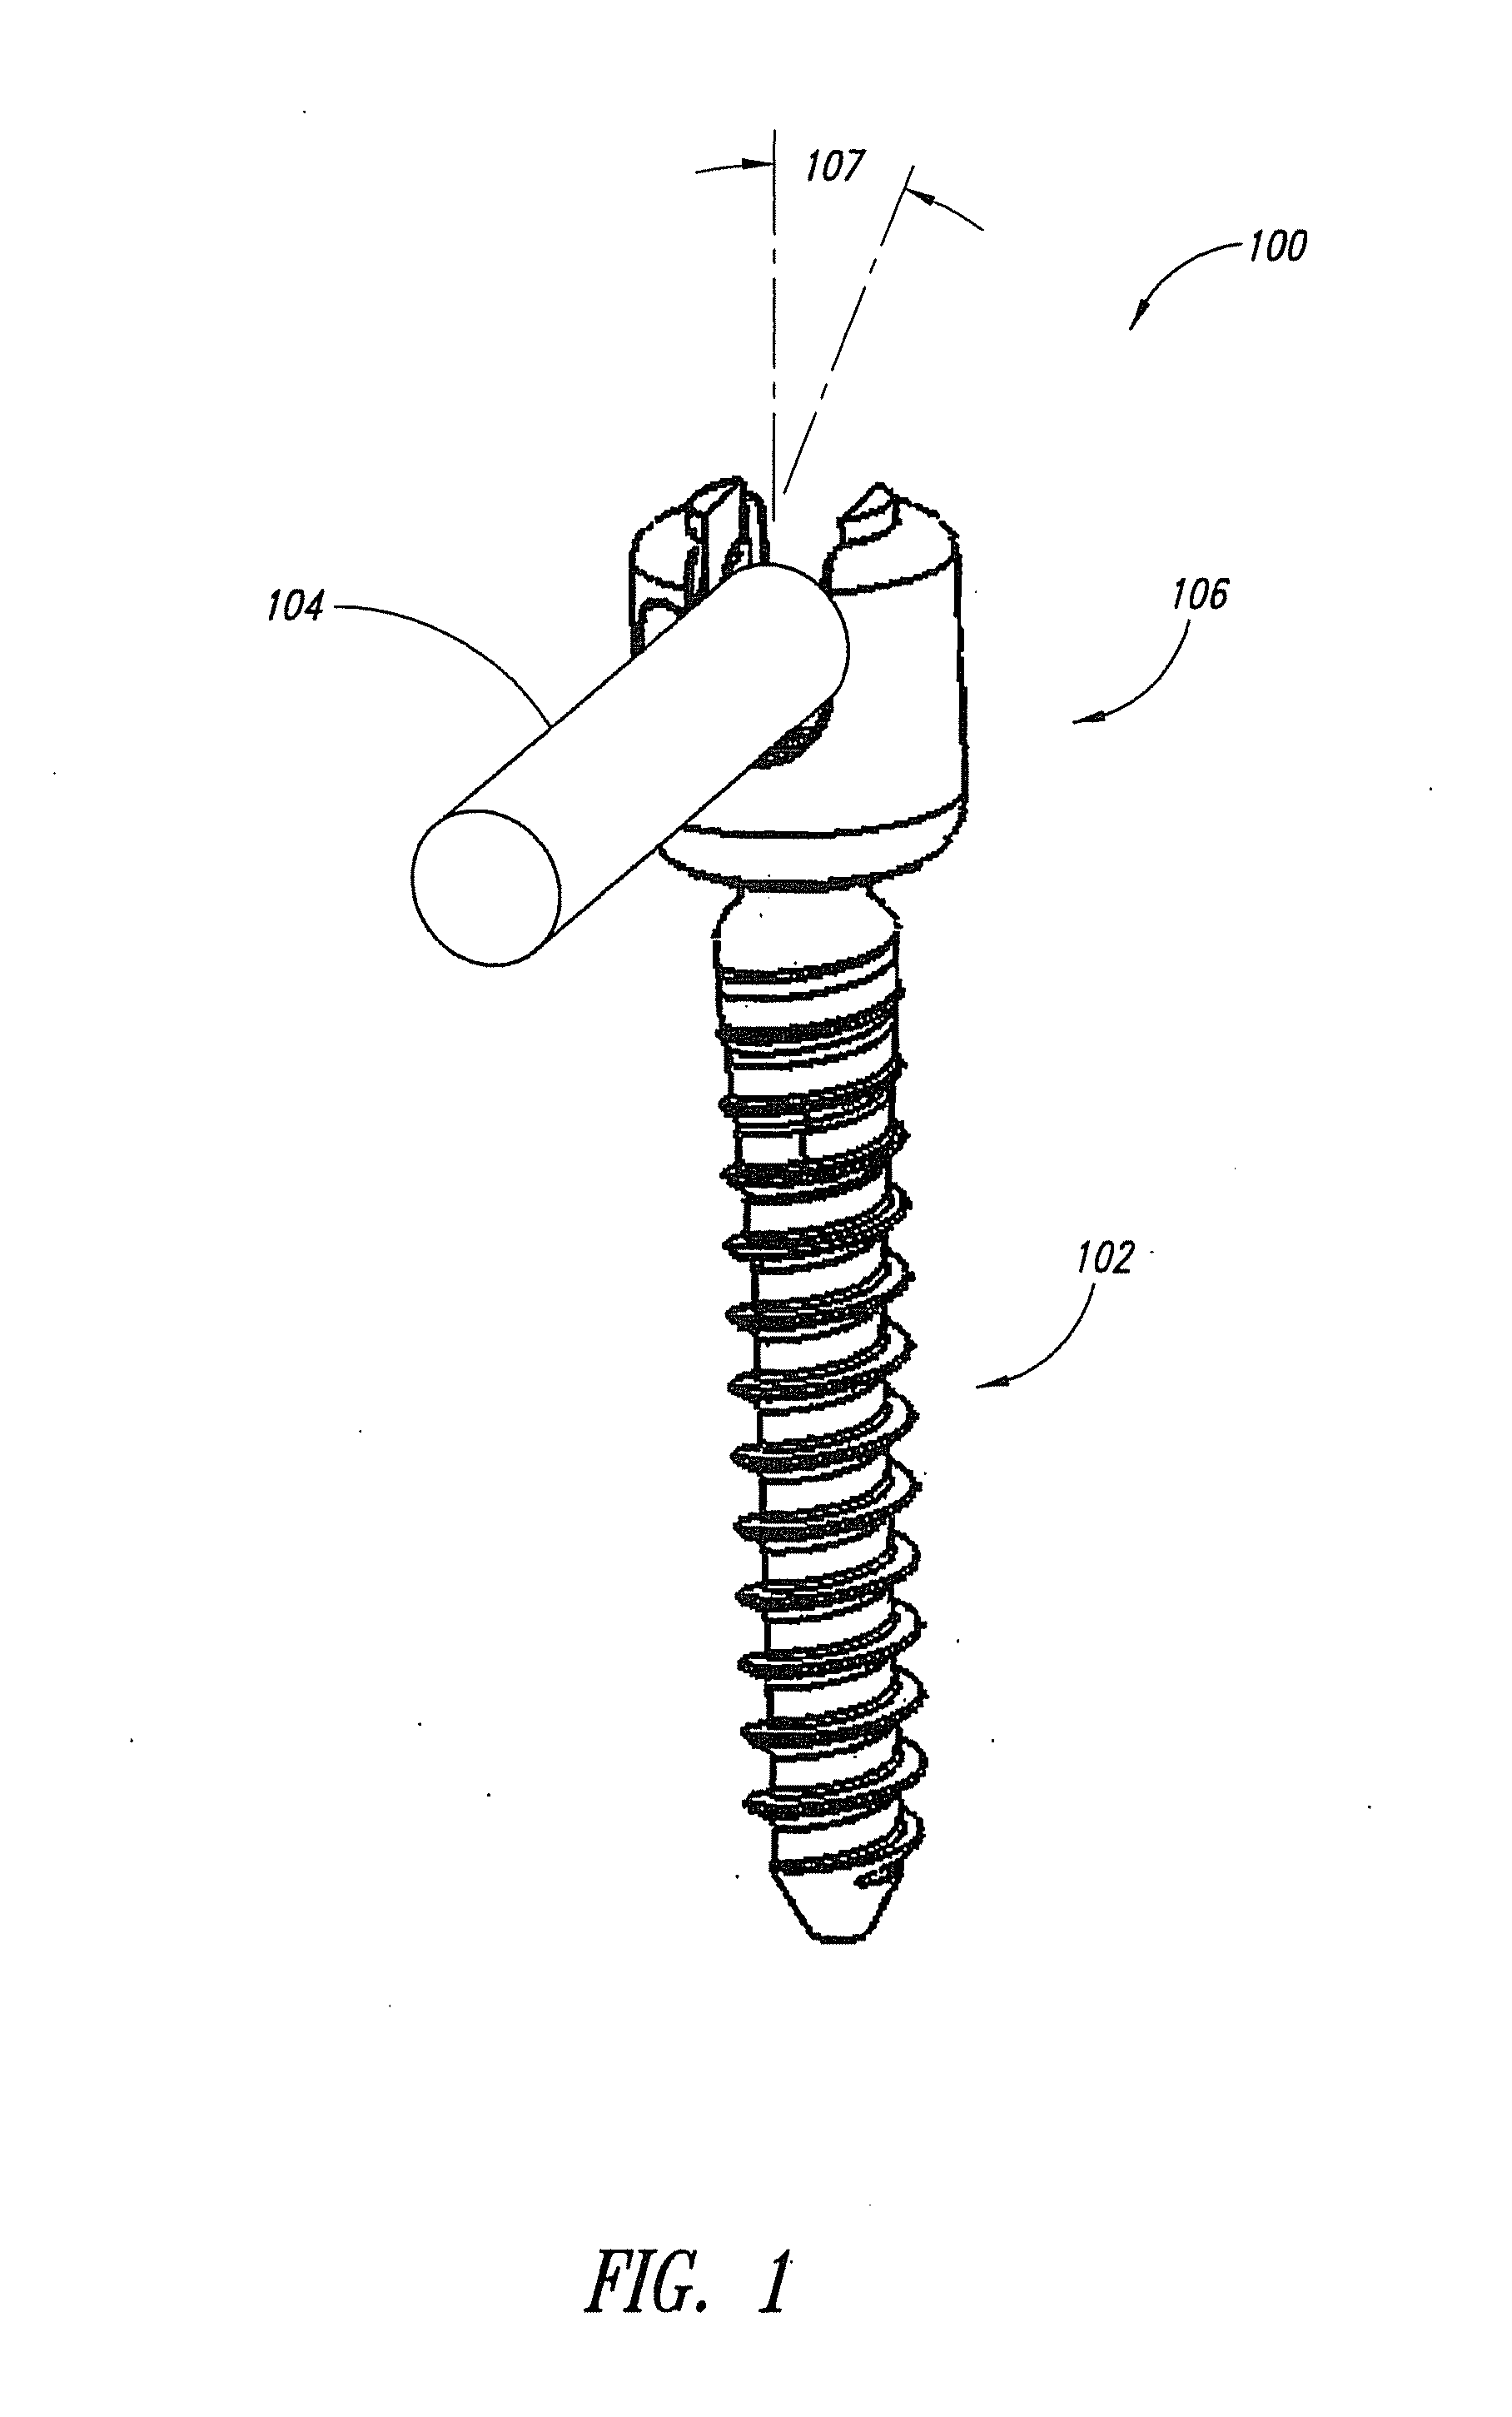 Pedicle Screw Systems and Methods of Assembling/Installing the Same